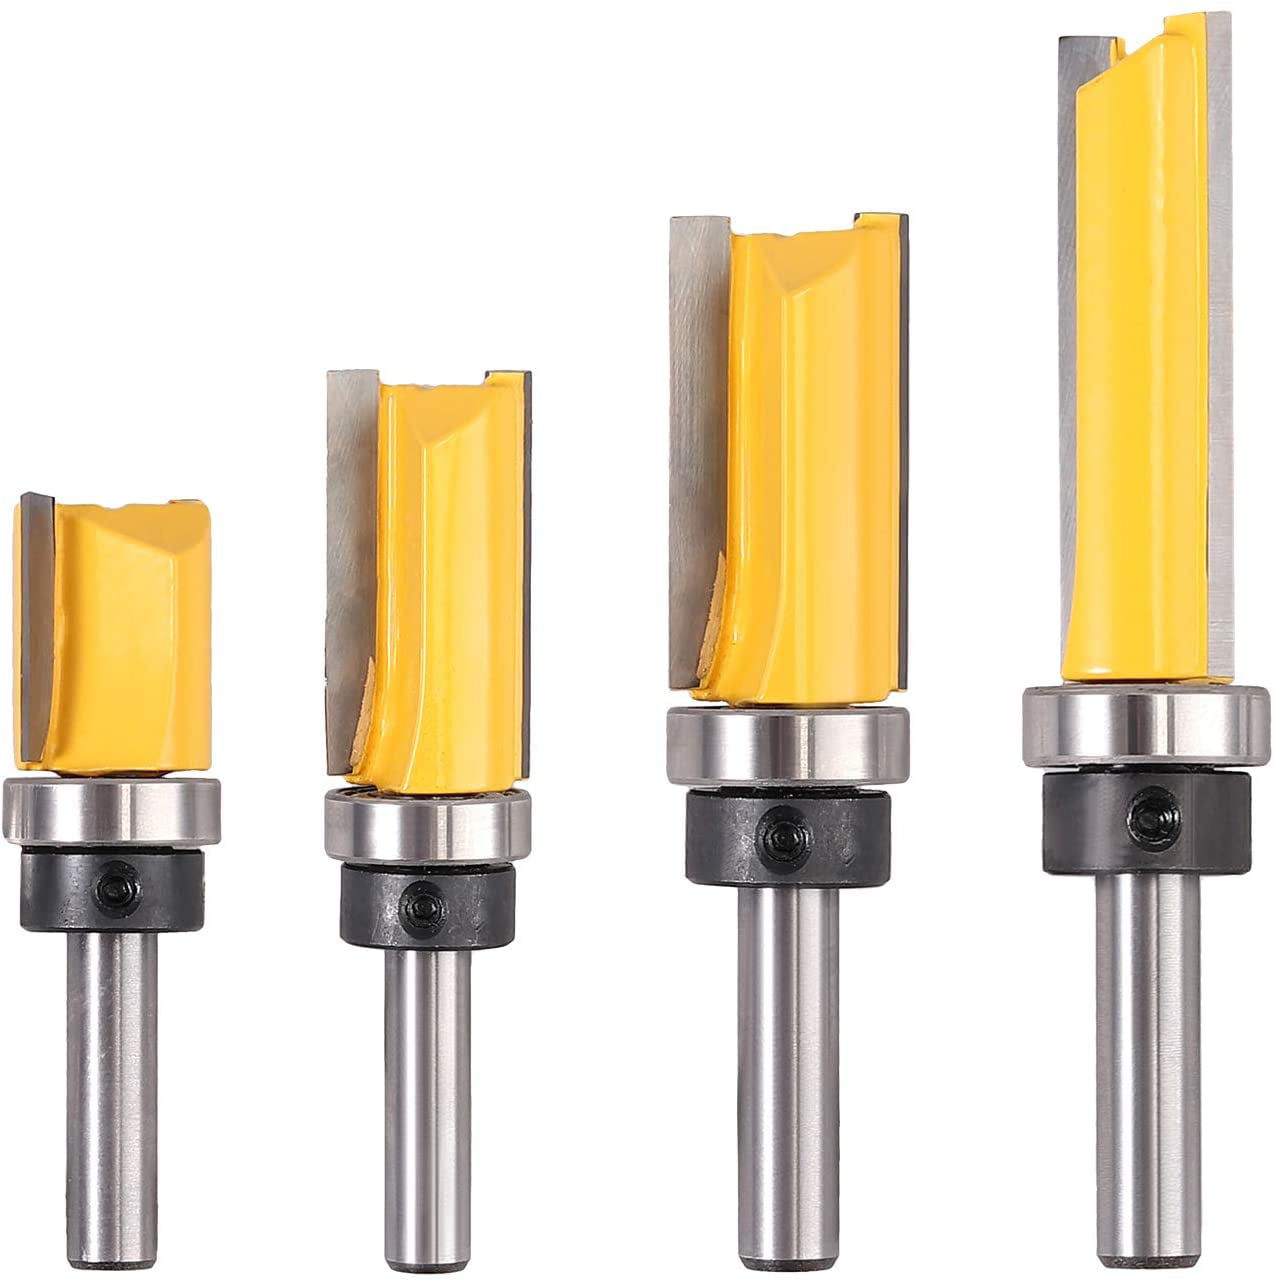 2inch Straight Router Bits for Woodwork 8mm Shank 3/4inch Cutter Dia 